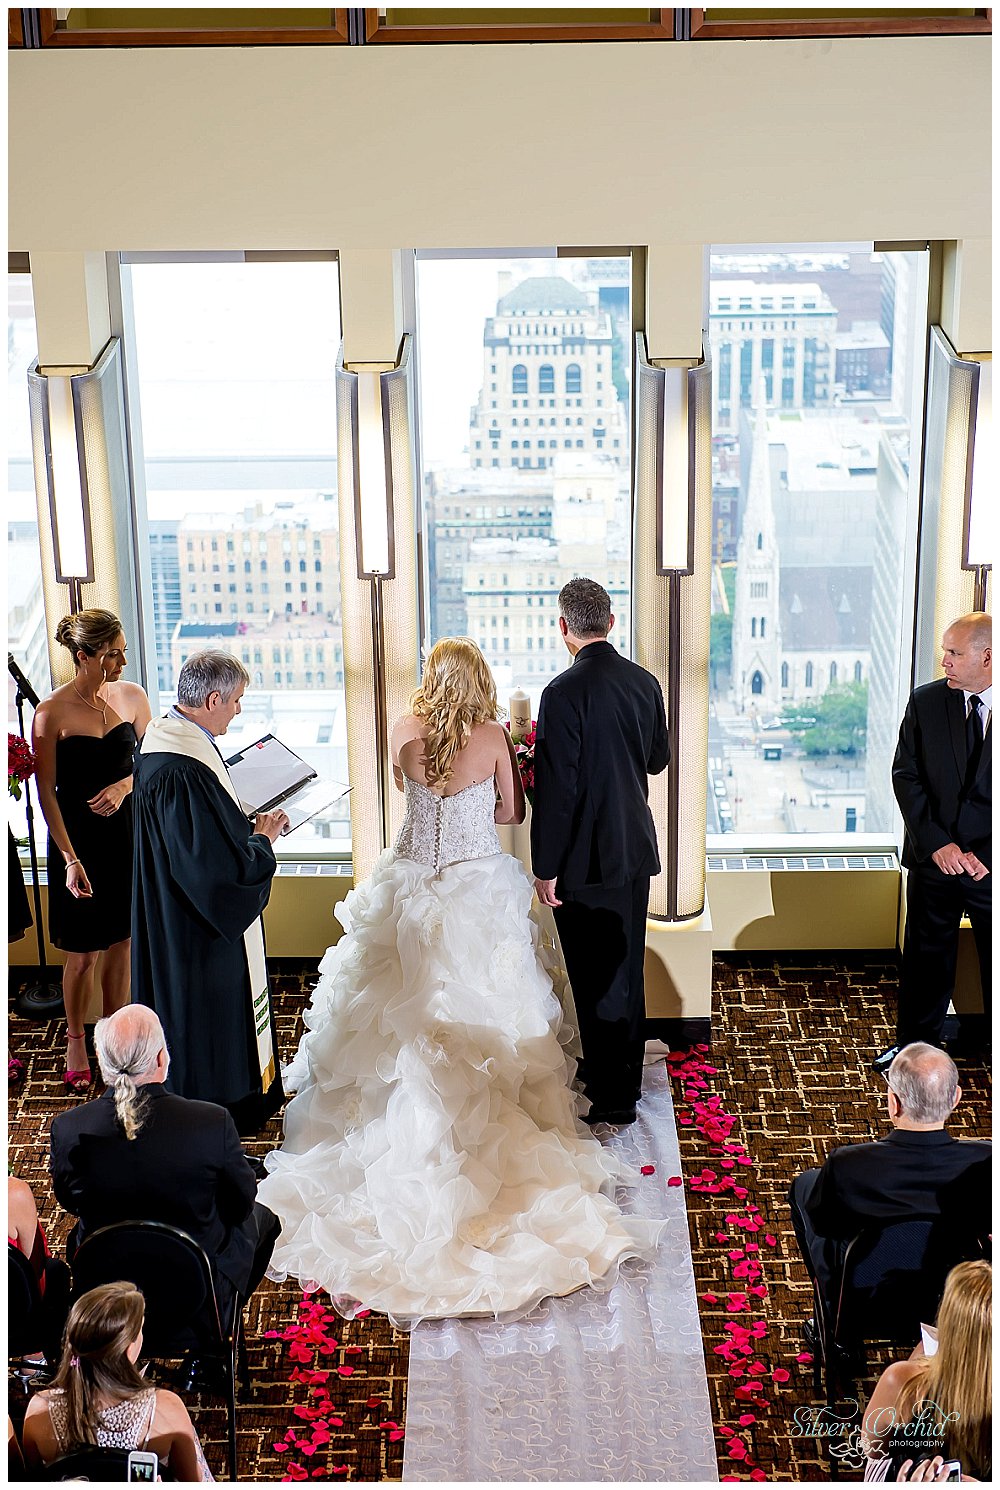 ©Silver Orchid Photography_wedding photography_FooteTopofTower_silverorchidphotography.com_0019.jpg